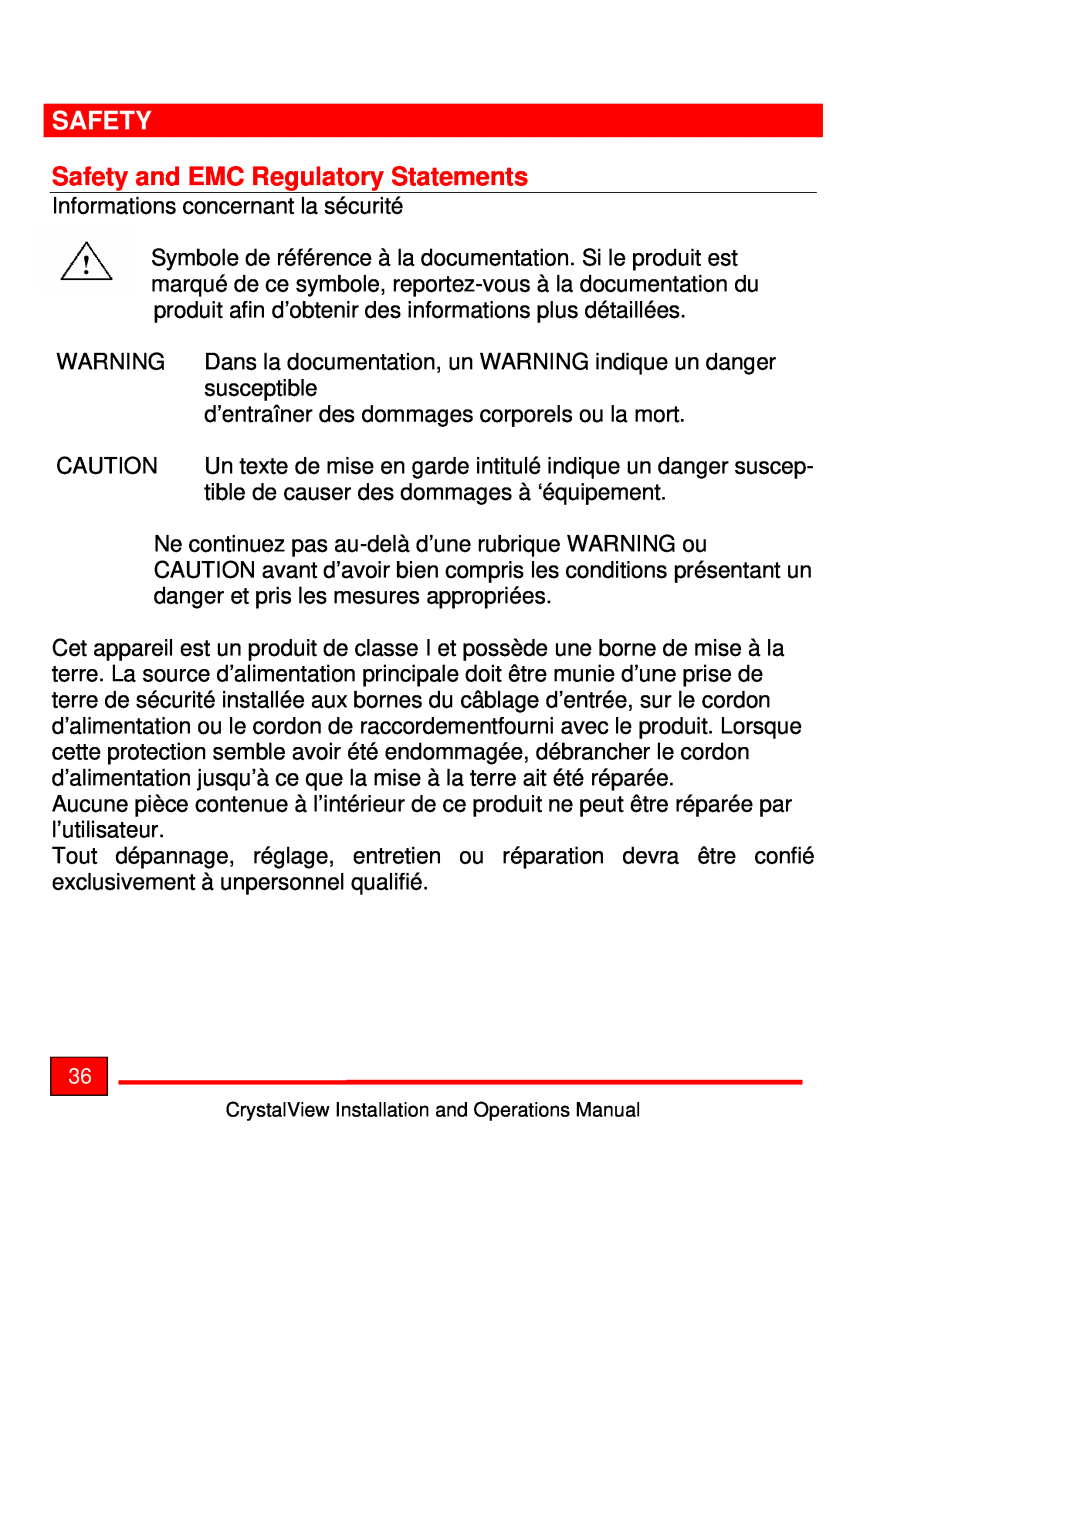 Rose electronic Crystal View operation manual Safety and EMC Regulatory Statements, Informations concernant la sécurité 